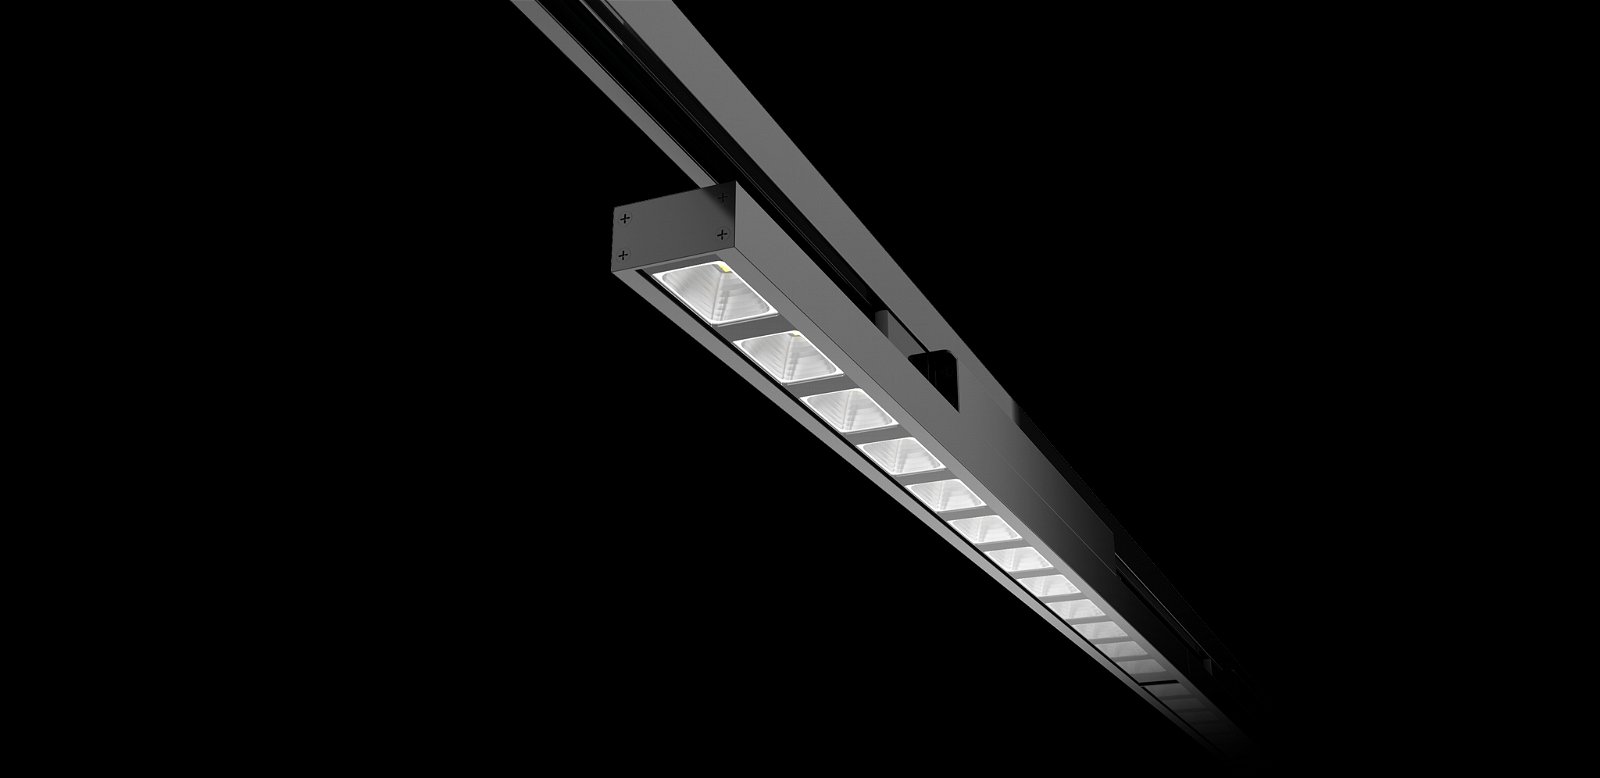 Type A with reflecter Linear LED Track Light 40w/60w led track light 130lm/w 5